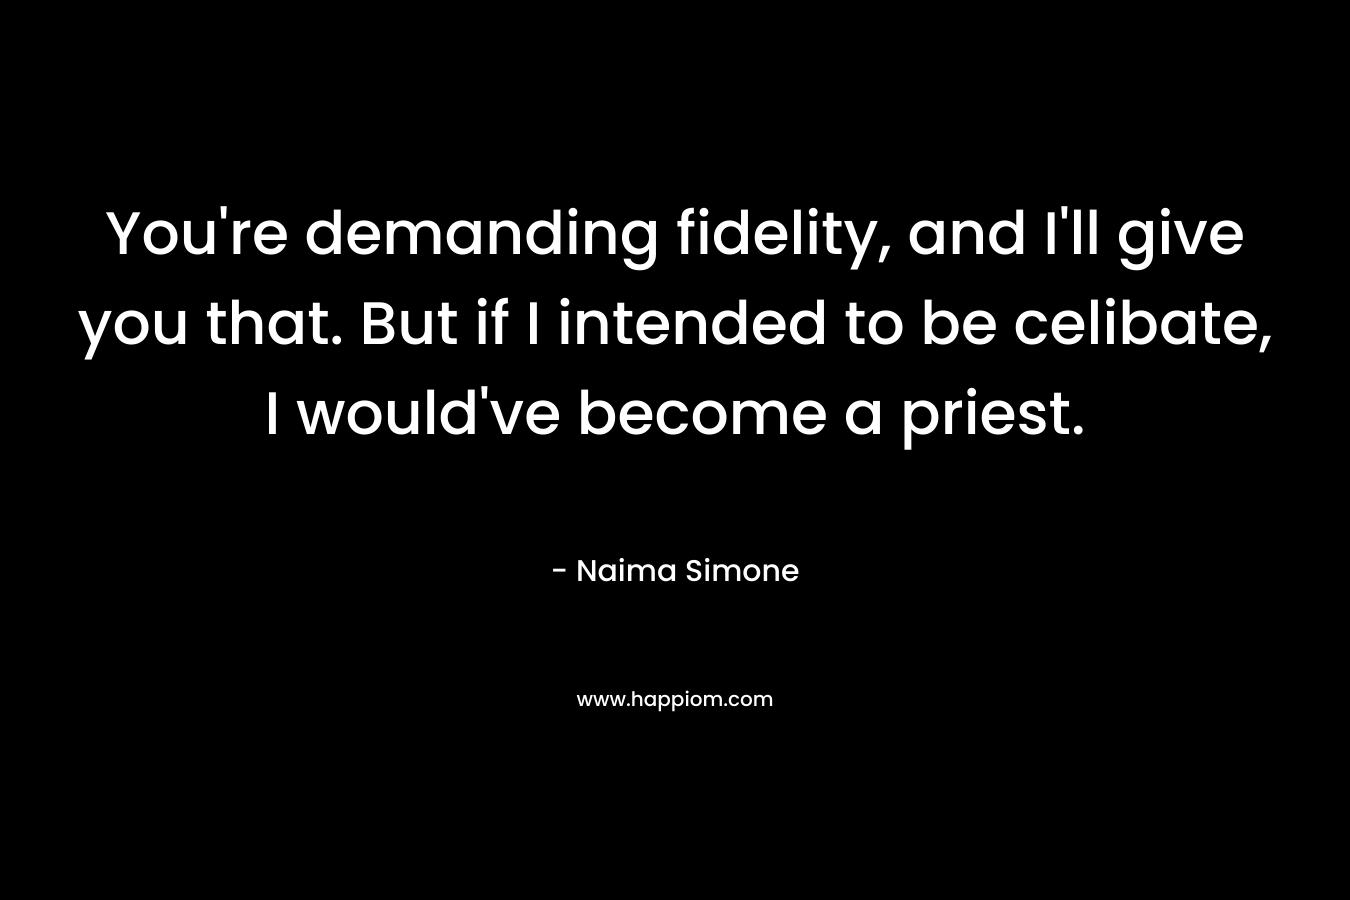 You’re demanding fidelity, and I’ll give you that. But if I intended to be celibate, I would’ve become a priest. – Naima Simone